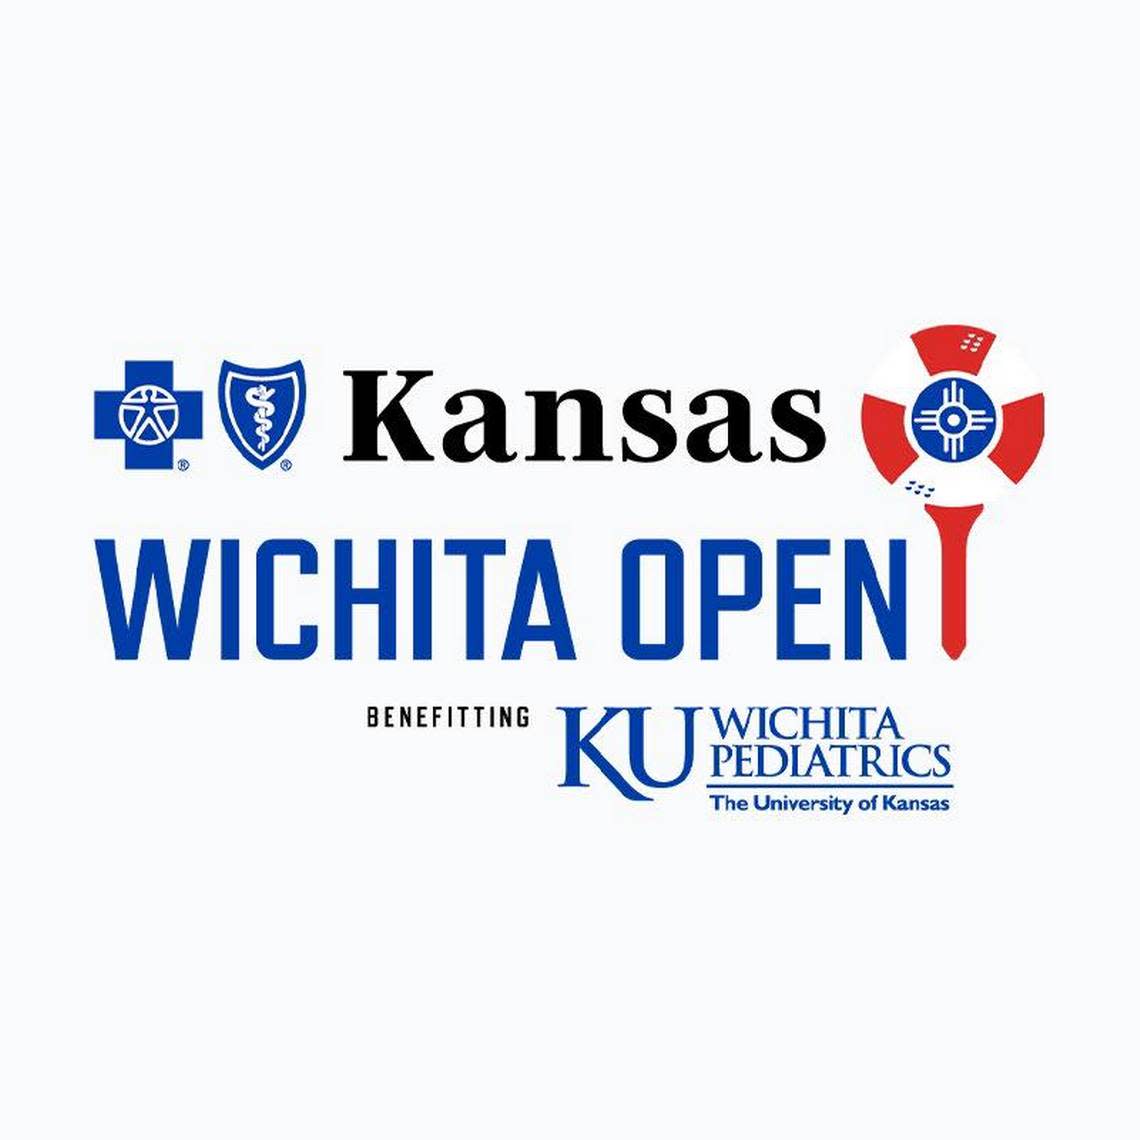 Blue Cross and Blue Shield of Kansas was announced as the new title sponsor of the Wichita Open on Tuesday.